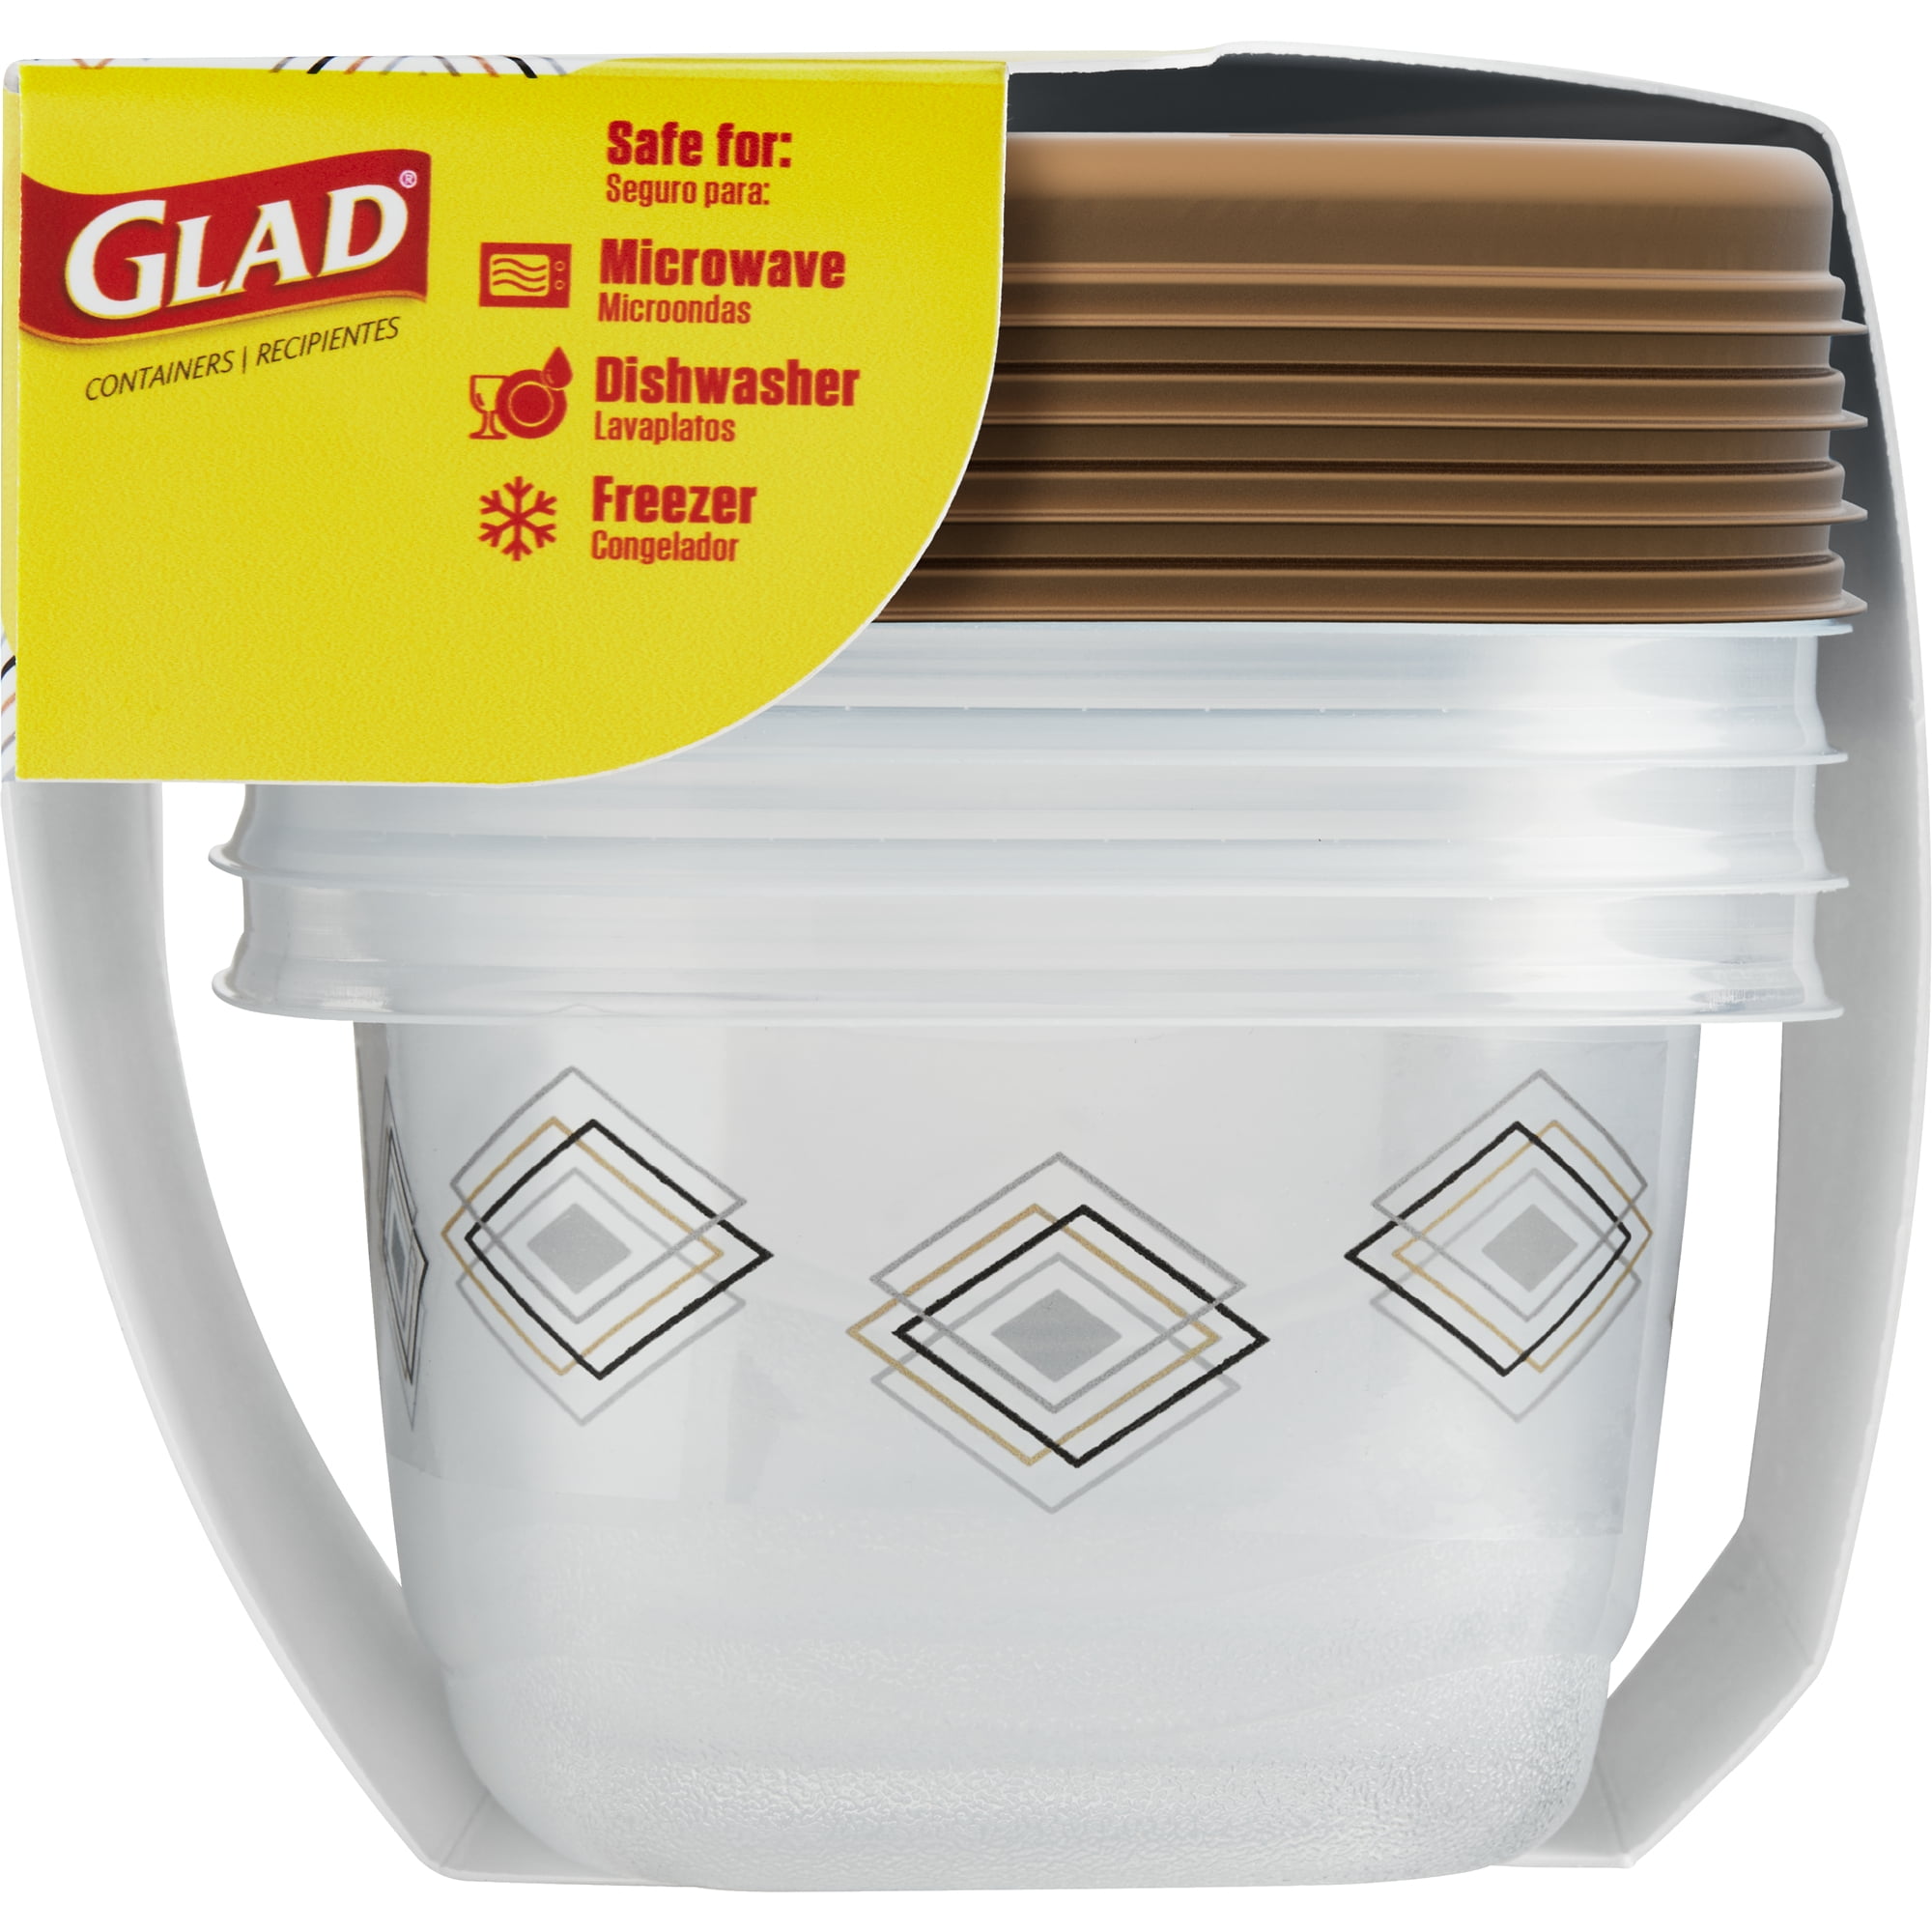 Glad 60795PK Food Storage Containers with Lids